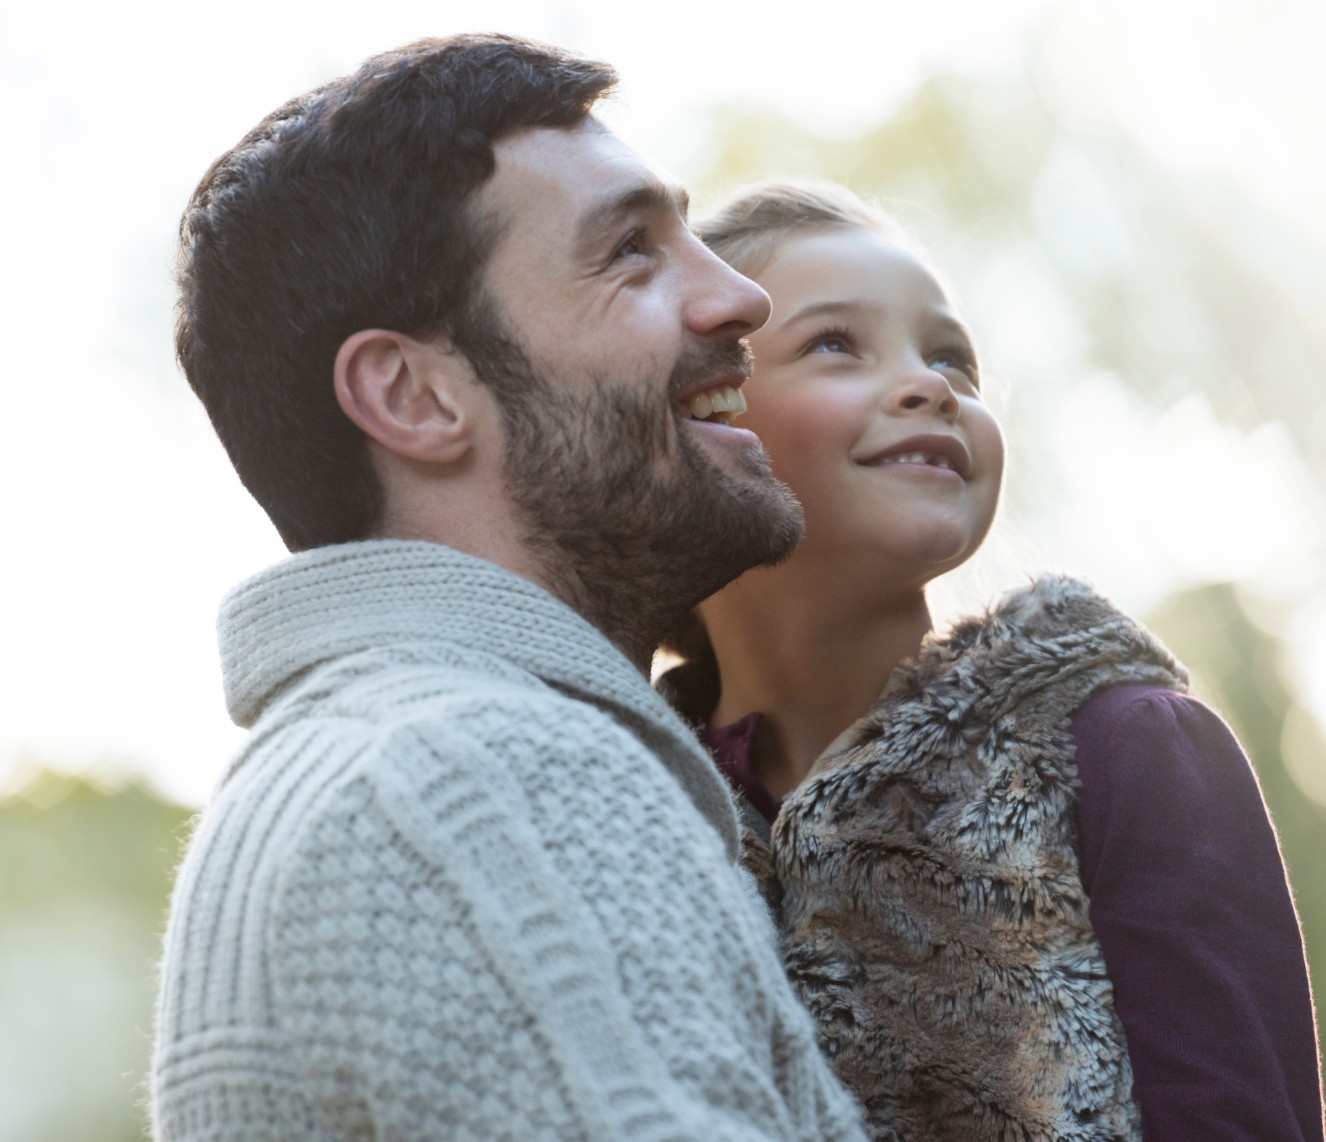 A young father wearing a sweater is holding his daughter in his arms. They are both looking to the right at the sky and smiling.